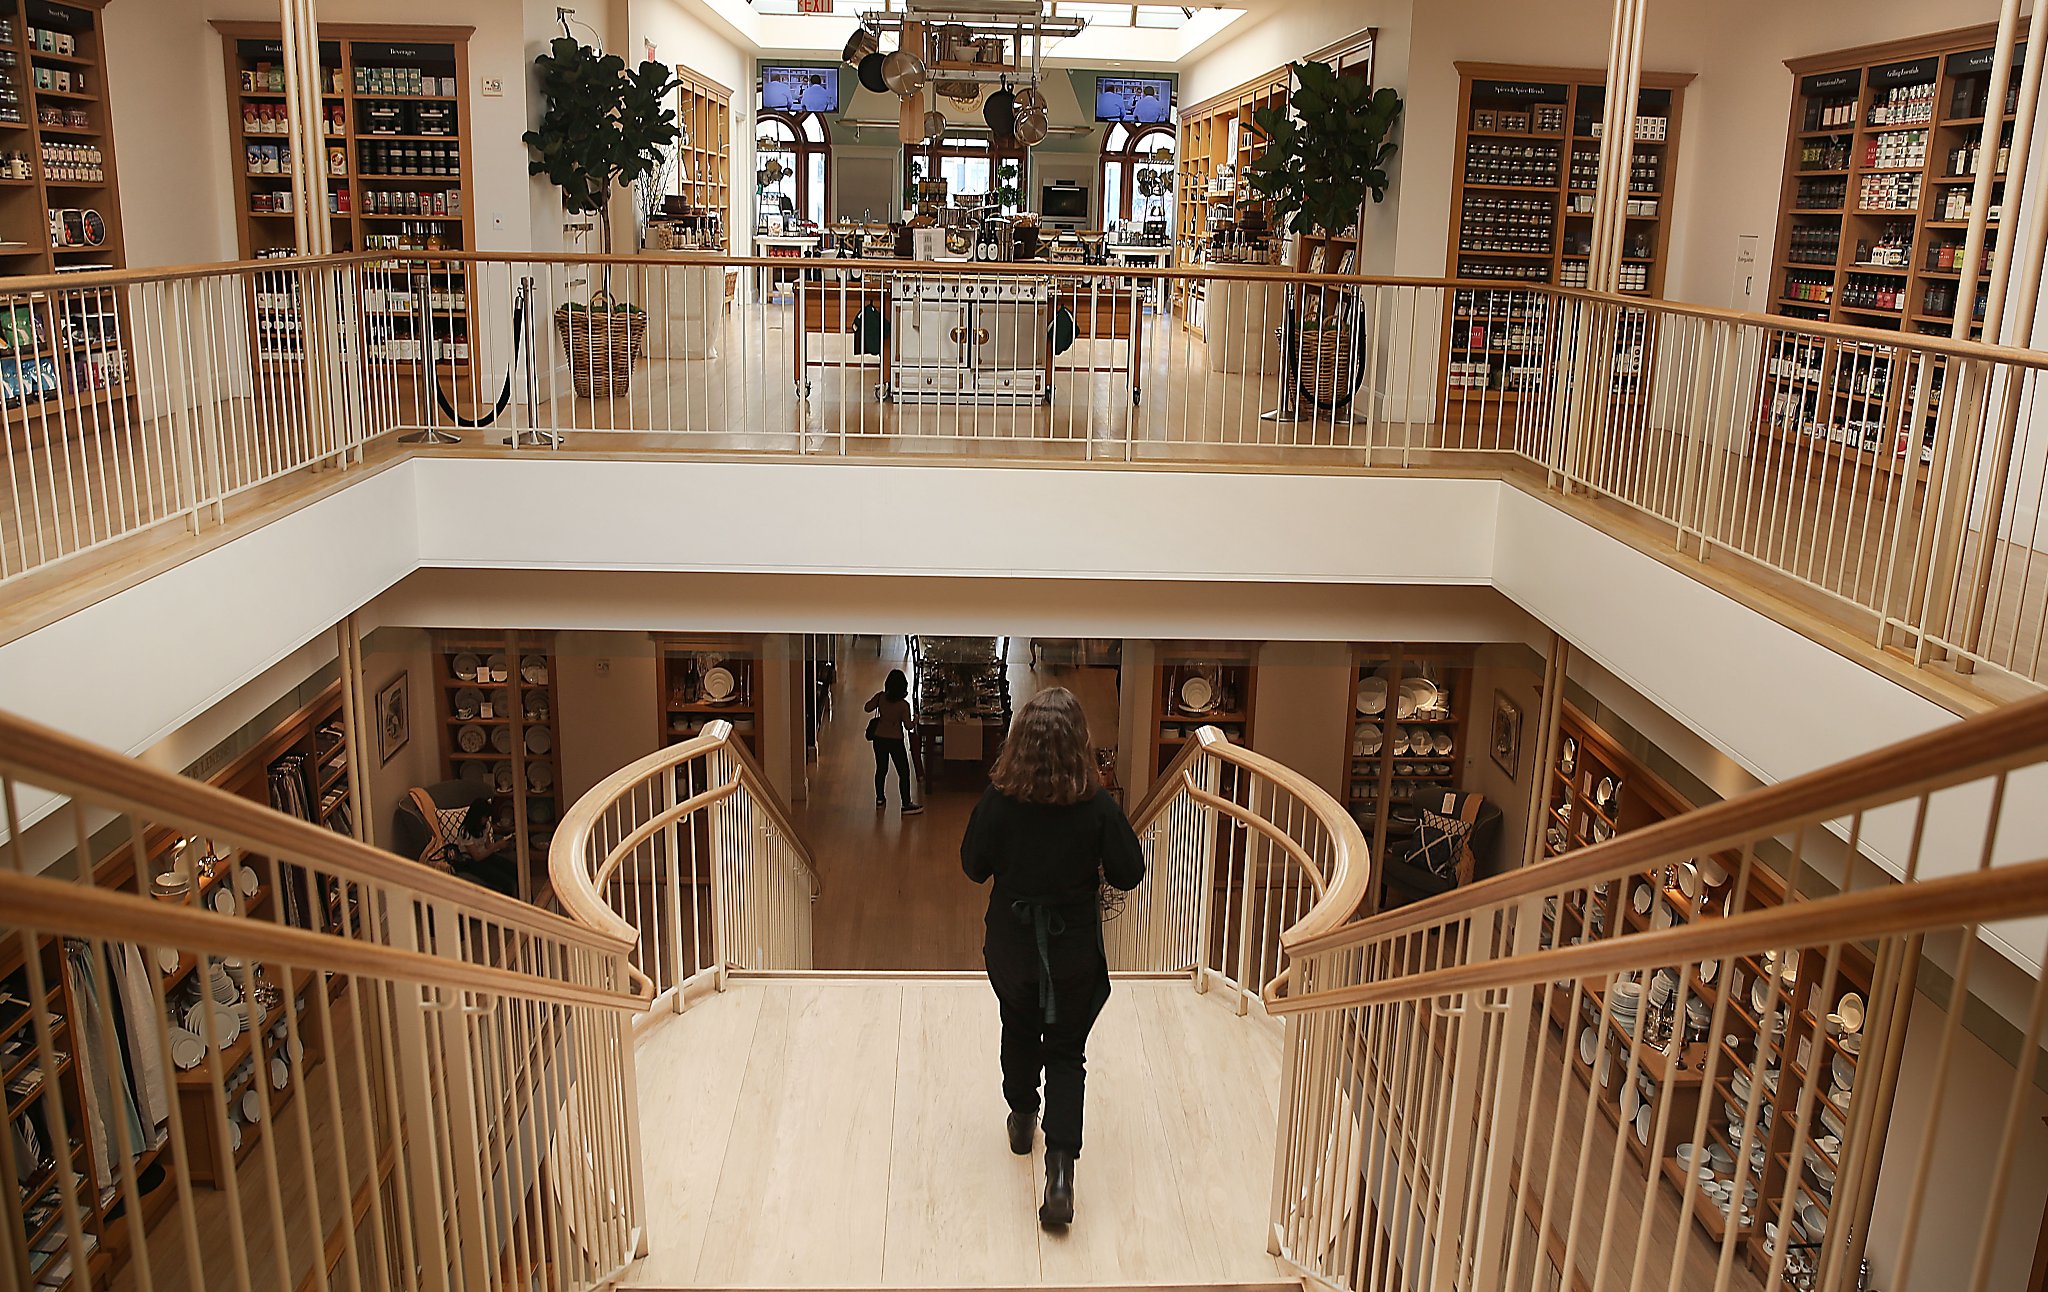 Digital-first, but not digital-only - Williams Sonoma's omni